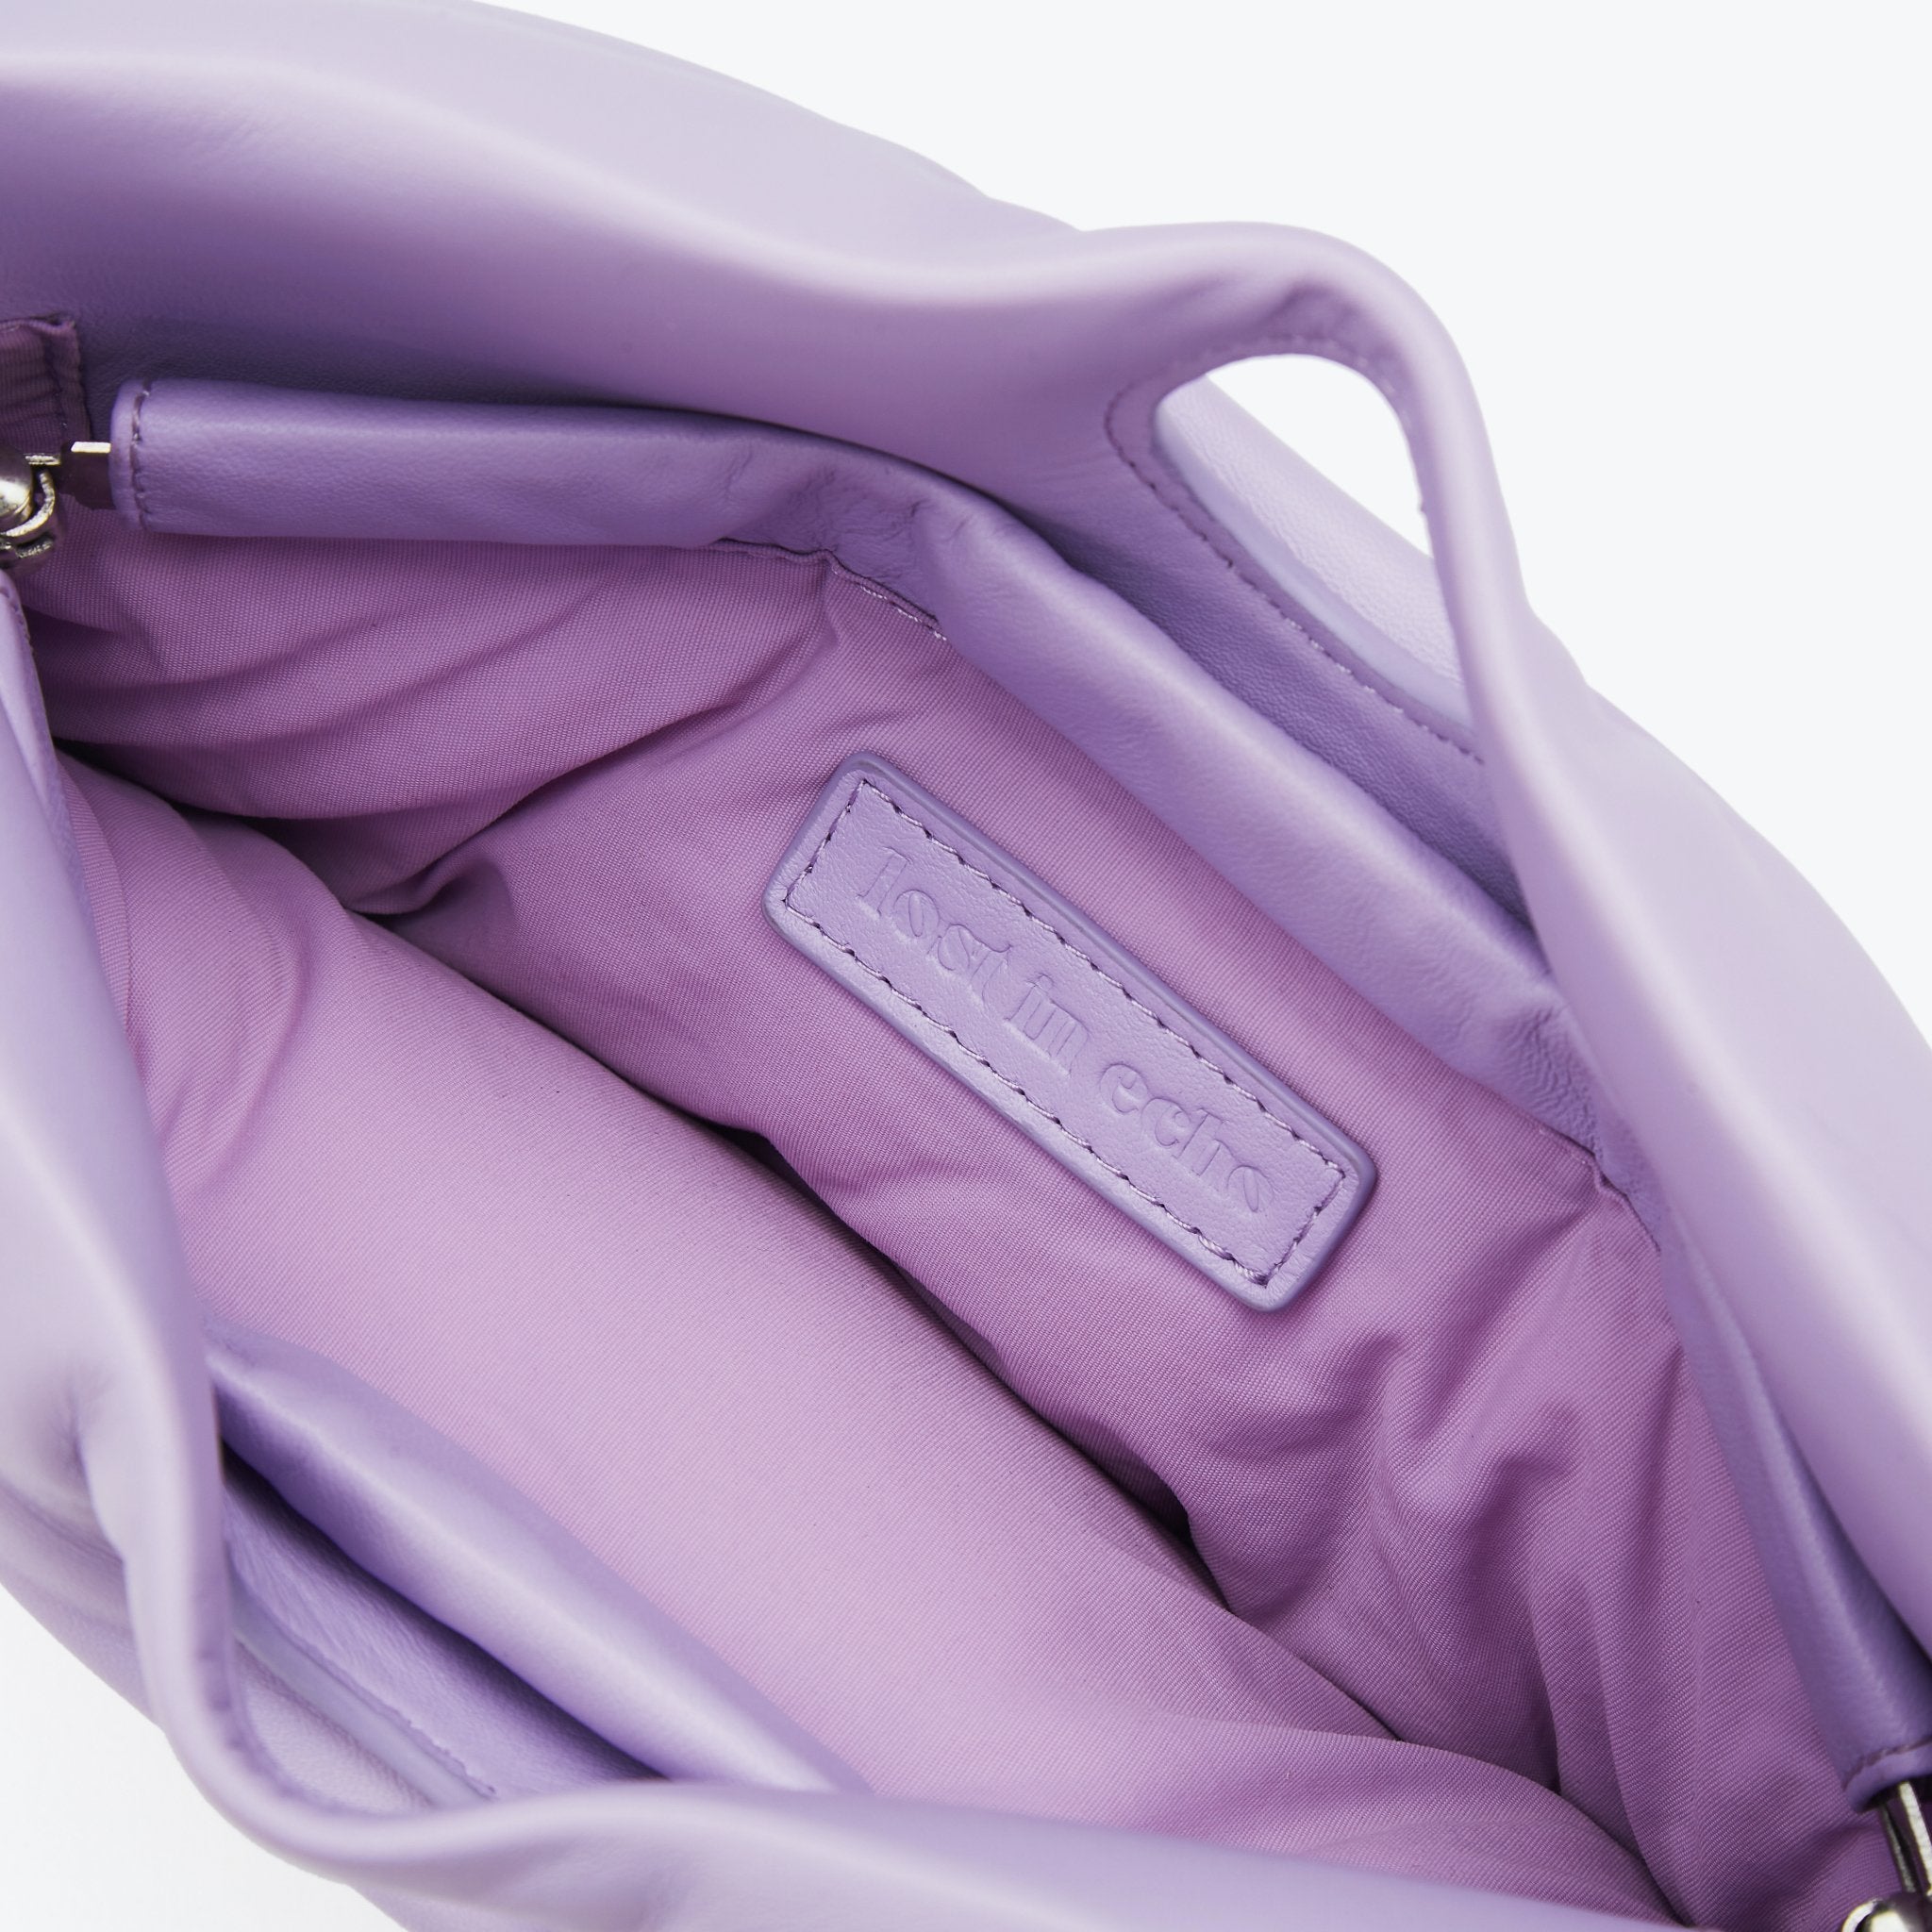 LOST IN ECHO Purple Cloud Pillow Bag | MADA IN CHINA